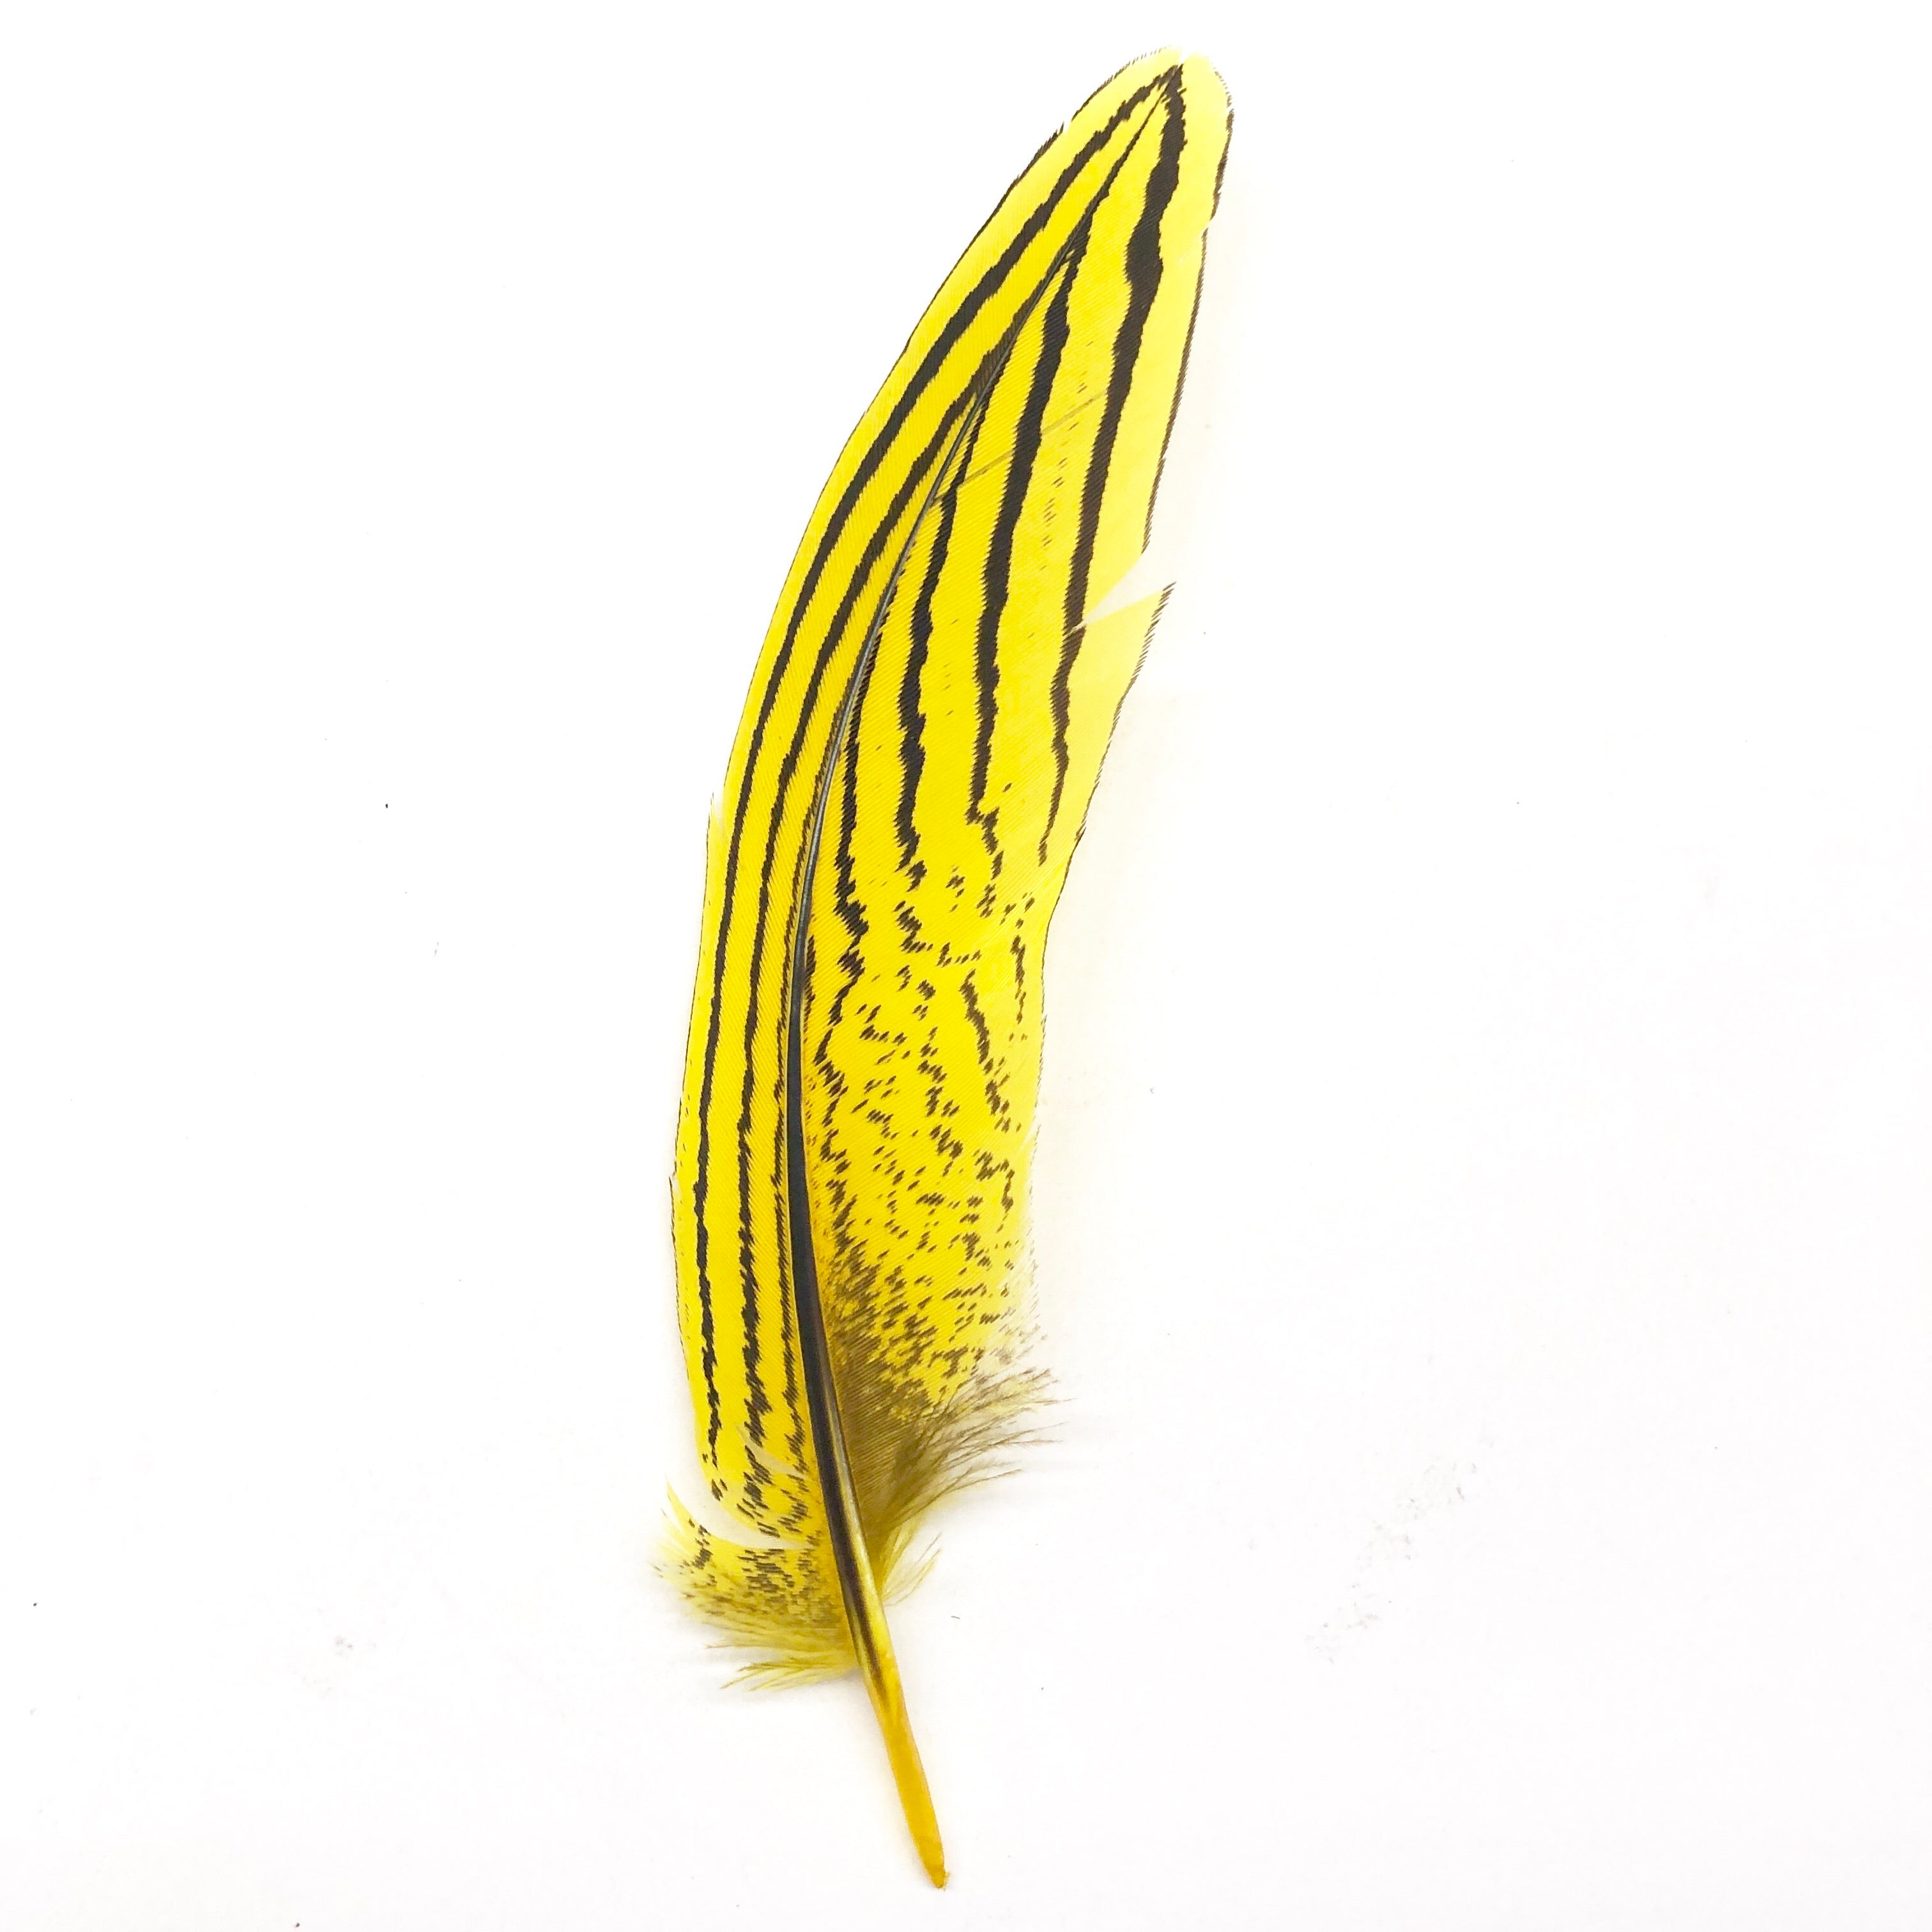 Under 6" Silver Pheasant Tail Feather x 10 pcs - Yellow